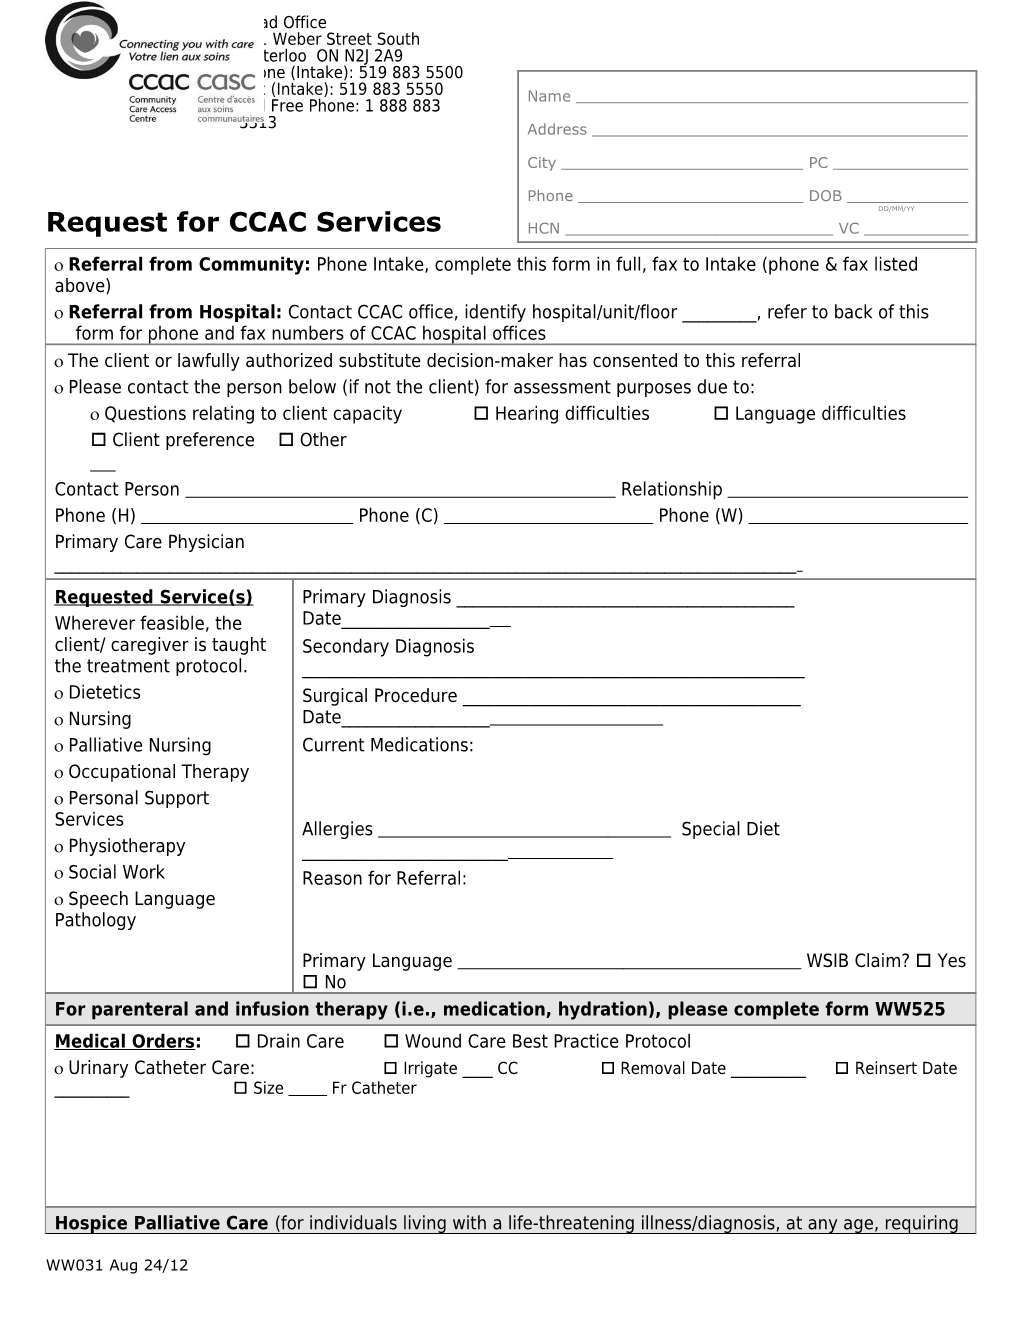 WW031 Request for CCAC Services